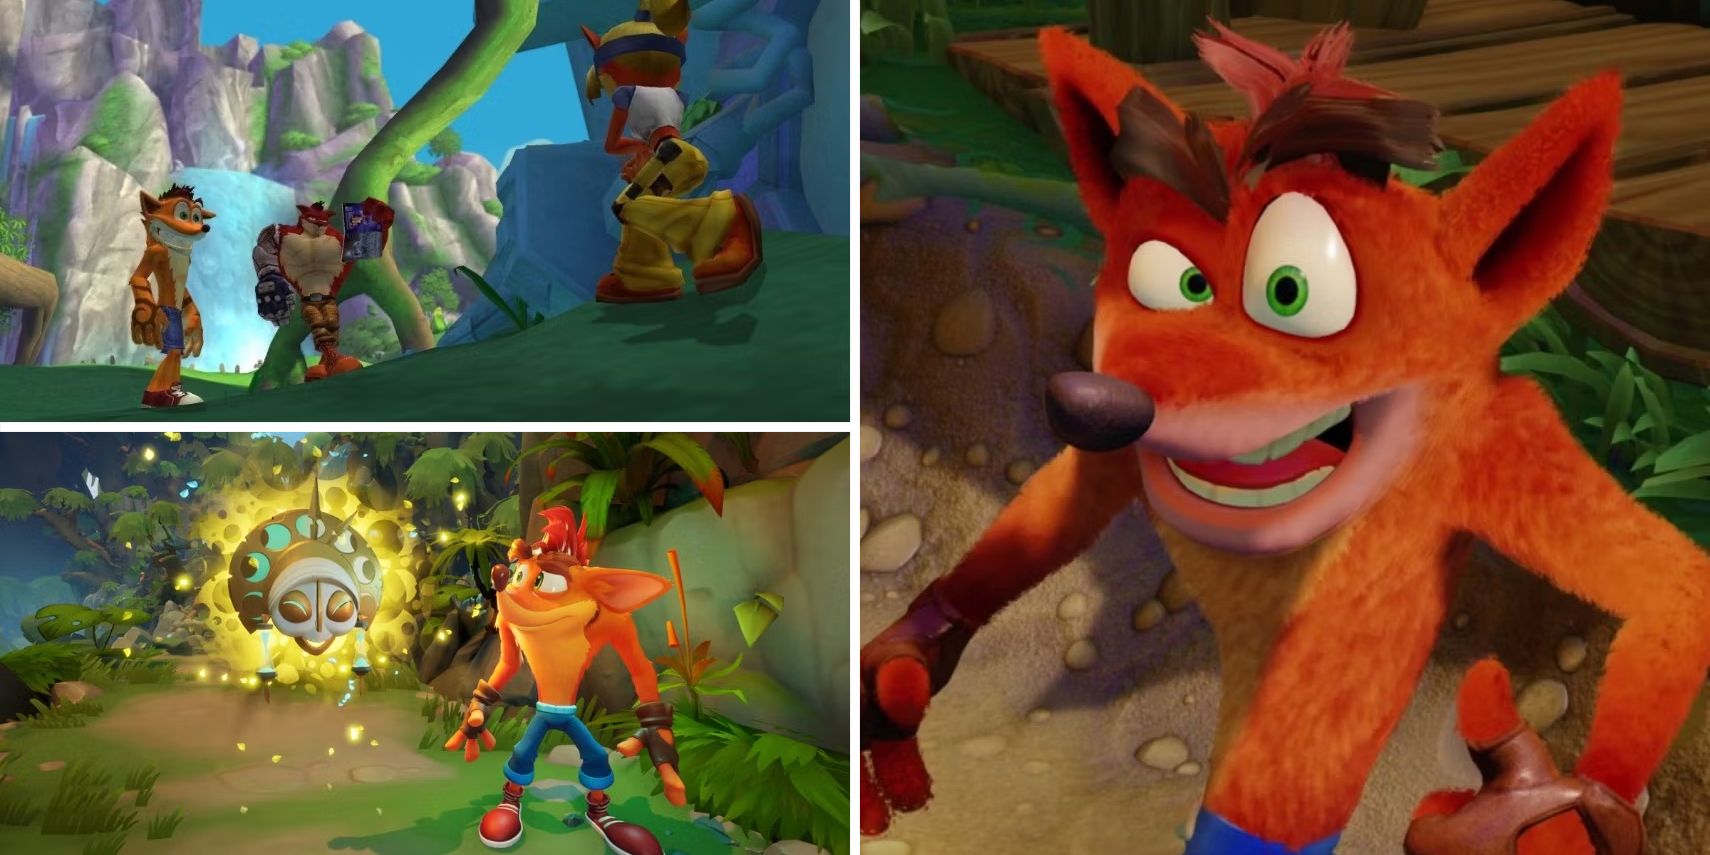 CRASH bandicoot Special - COMPLETE HISTORY of ALL Games 